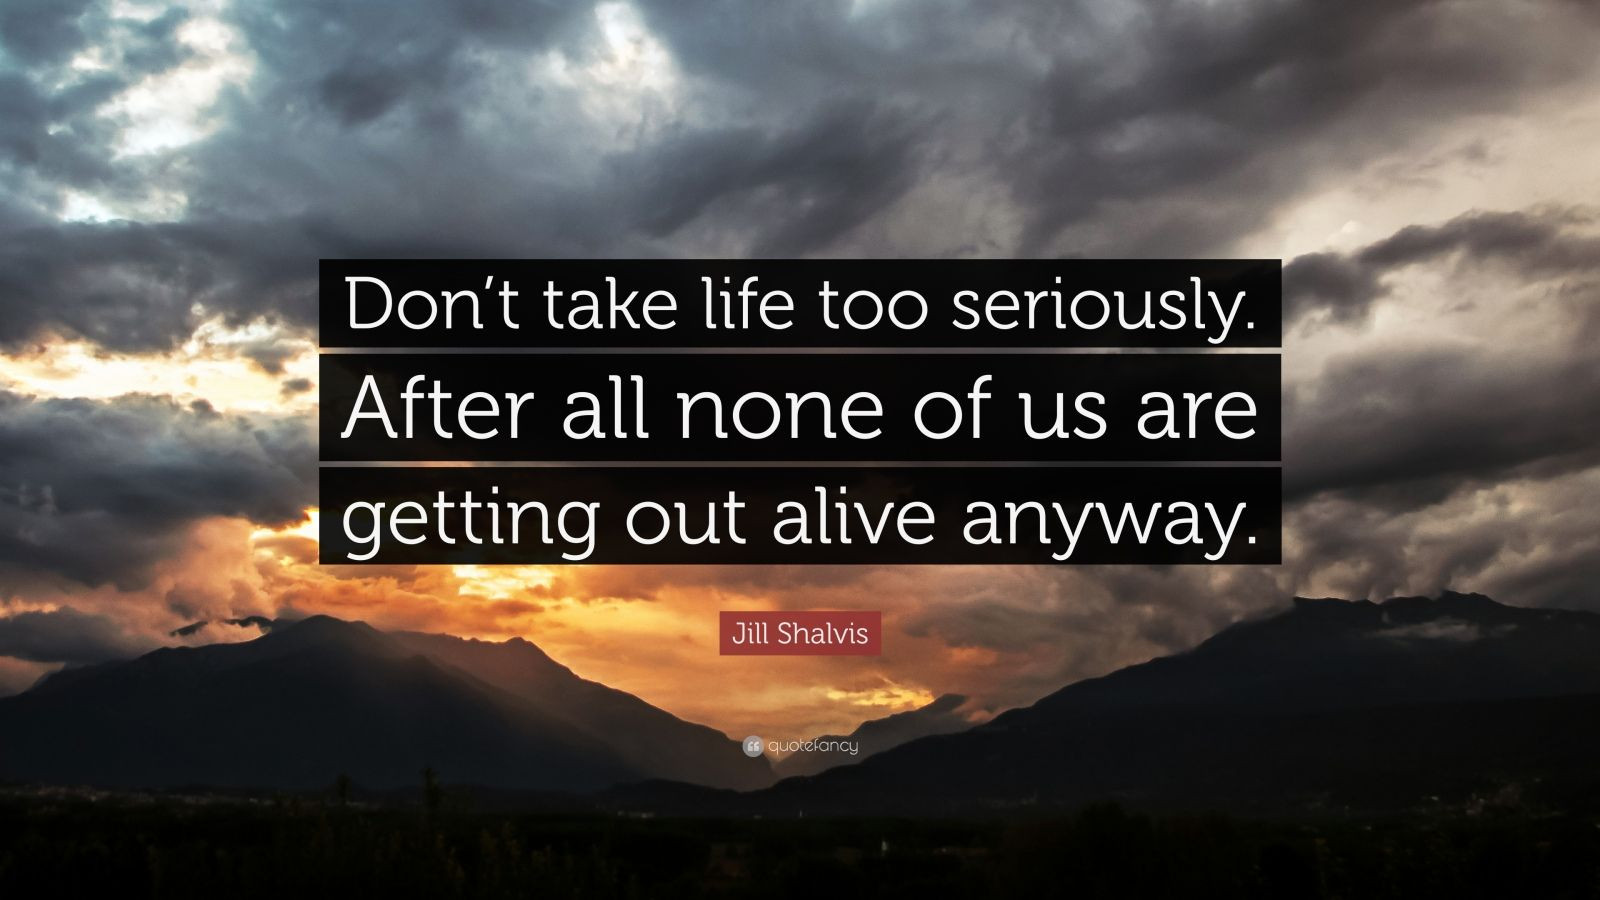 Don T Take Life Too Seriously Quotes
 Jill Shalvis Quote “Don’t take life too seriously After